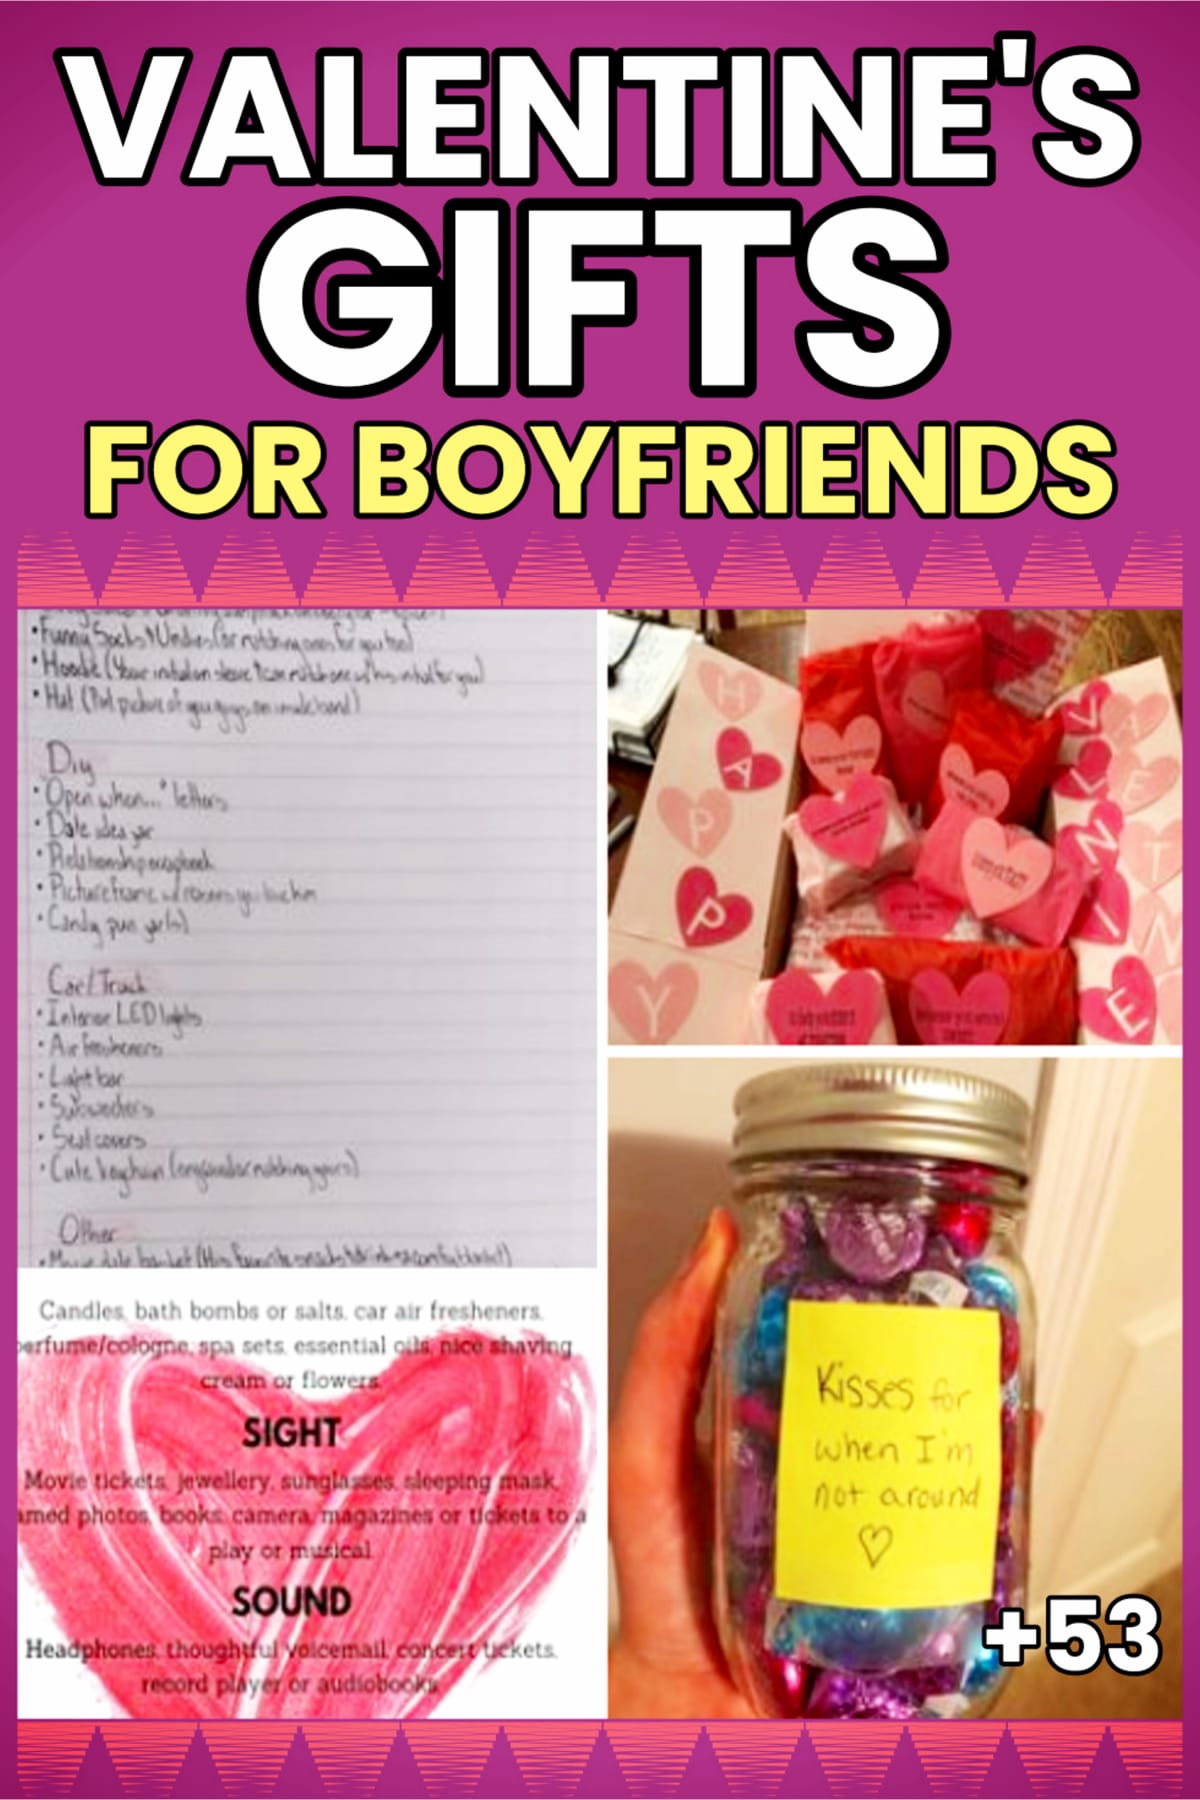 Valentine's Day gifts for boyfriend to make - baskets, romantic, DIY, gamer, aesthetic, senses, last minute, cheap, creative, cute bf gift ideas for him - spoiling him for Vday